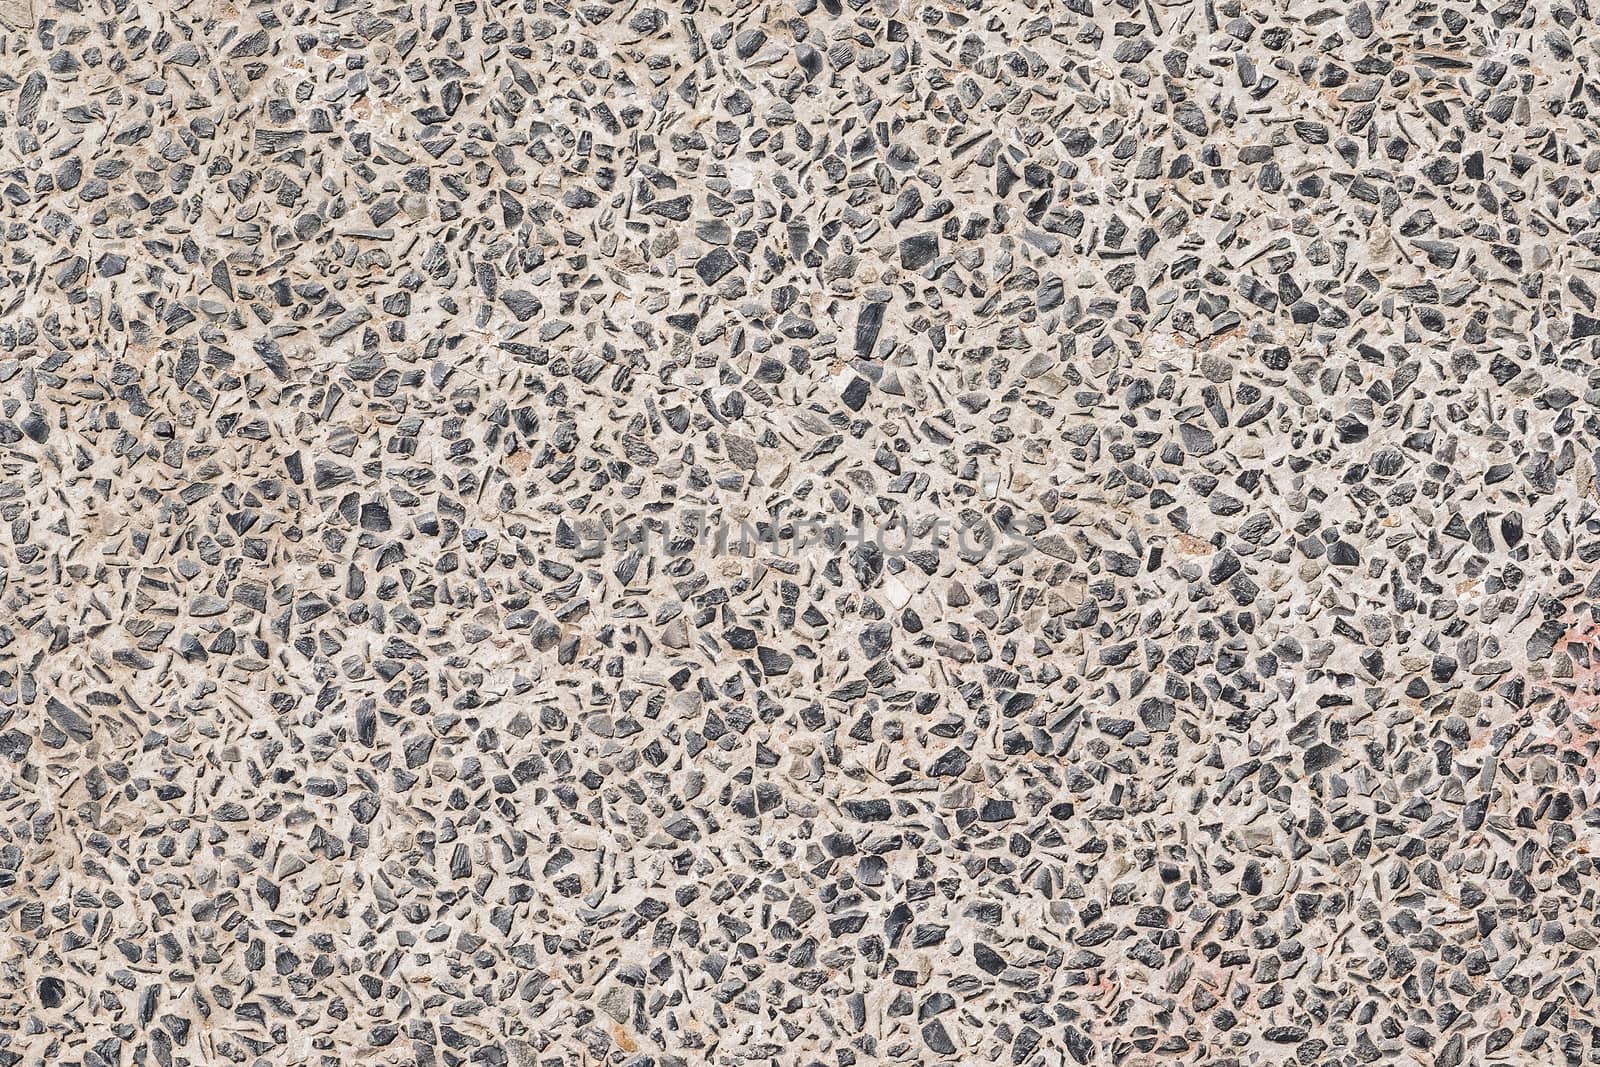 Stone background made of a closeup of a pile of pebbles